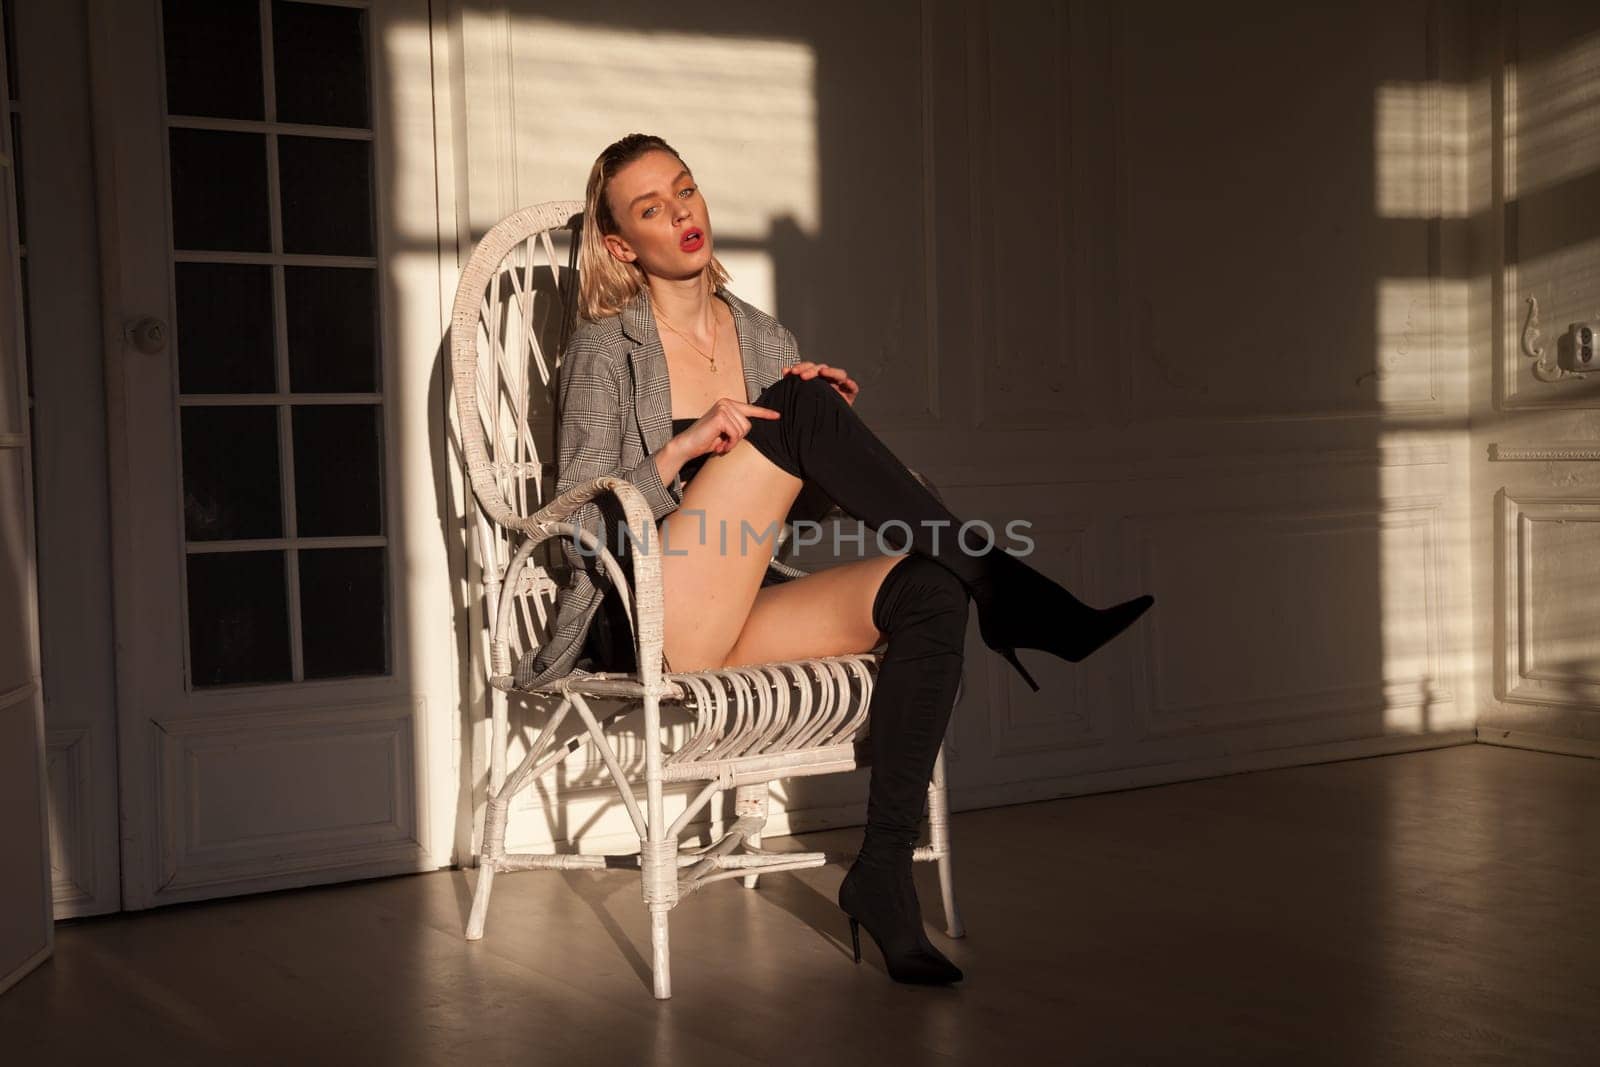 Portrait of a blonde woman sitting in a chair in an empty room